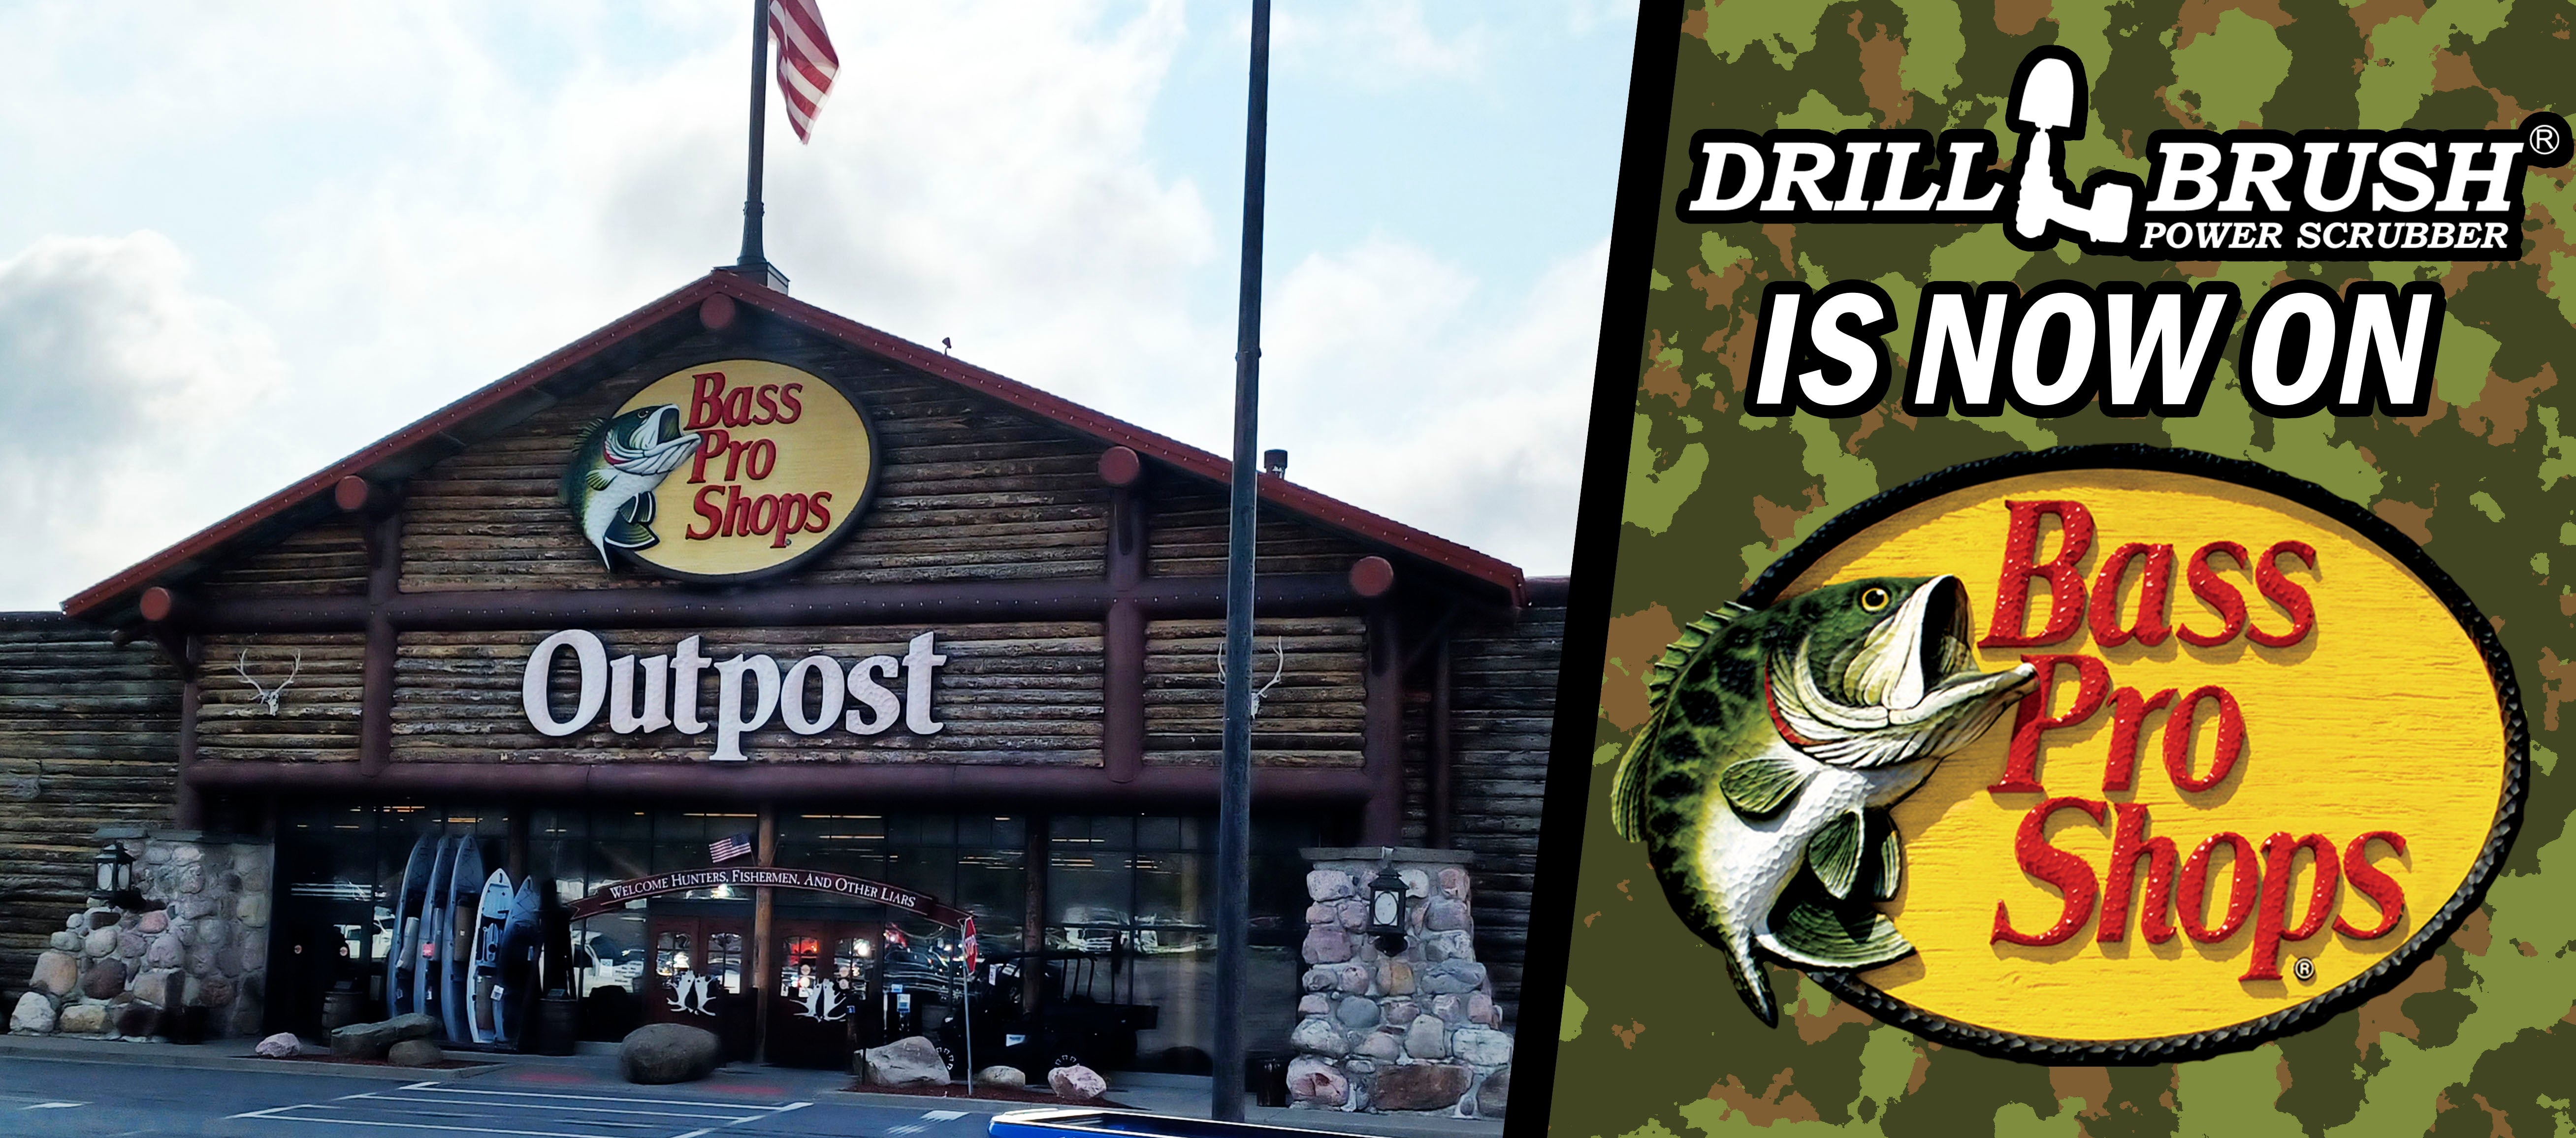 Drillbrush is Now Available on Bass Pro Shops’ Website